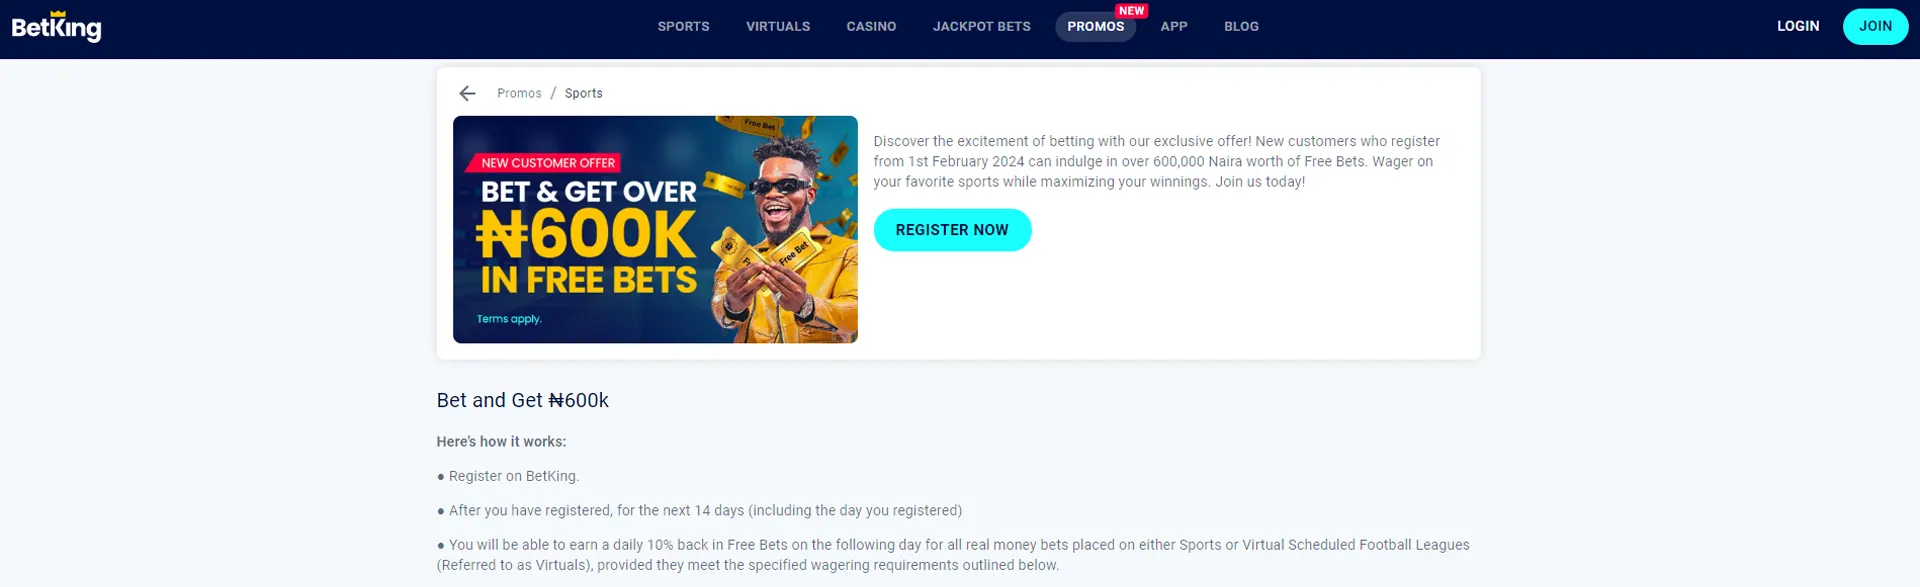 Page with welcome bonus for new customers on BetKing.